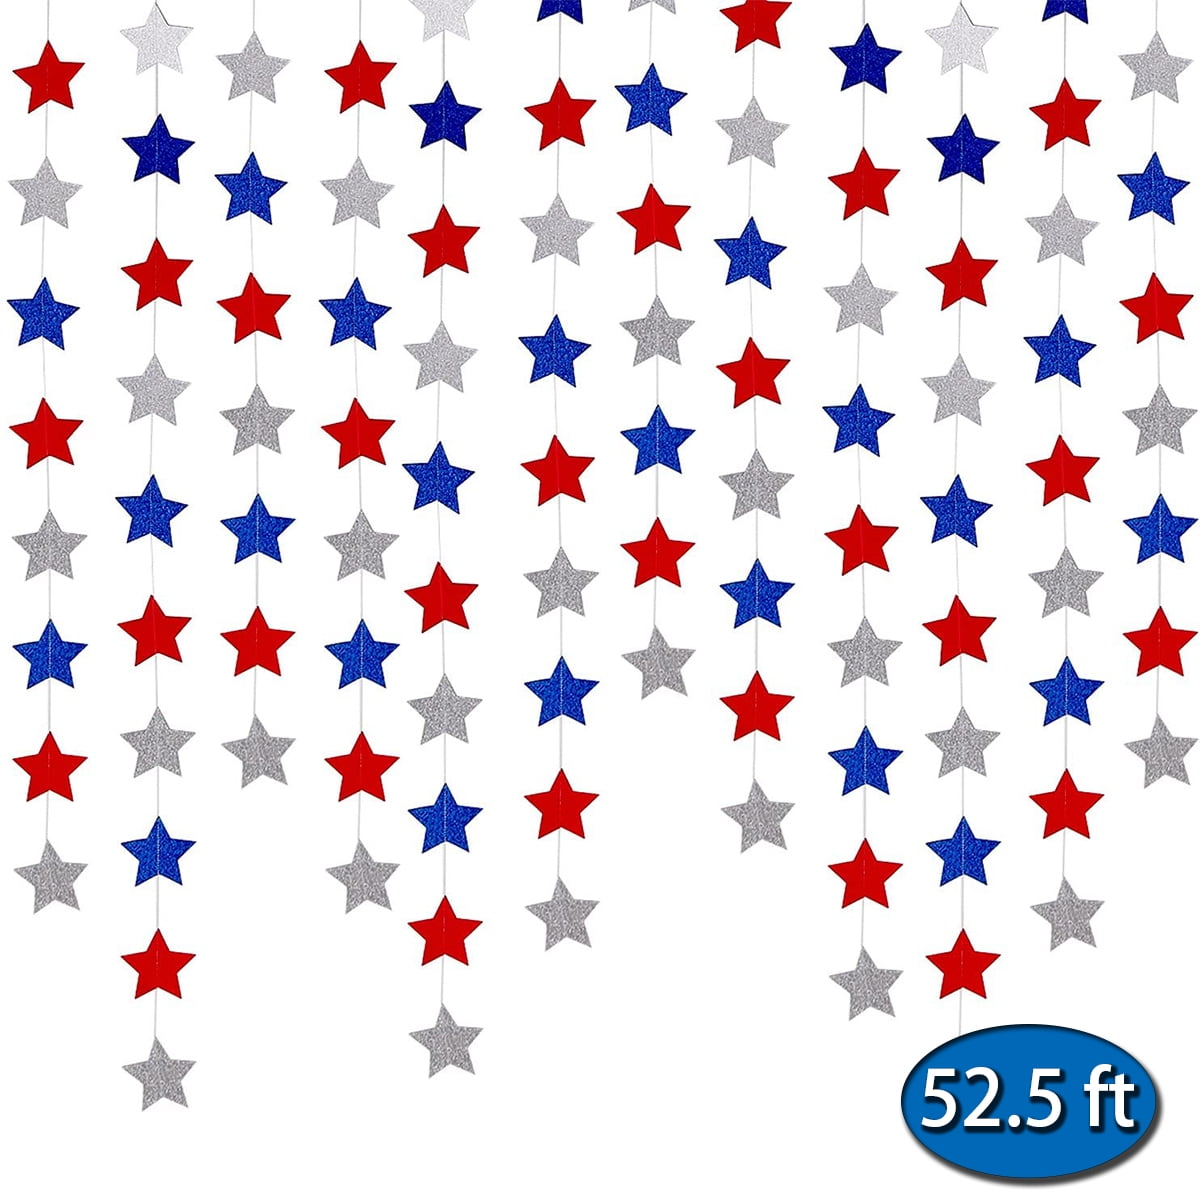 Details about   Patriotic 4th of July Americana Burlap Flag Star Stripes Wall Banner Decor NEW 